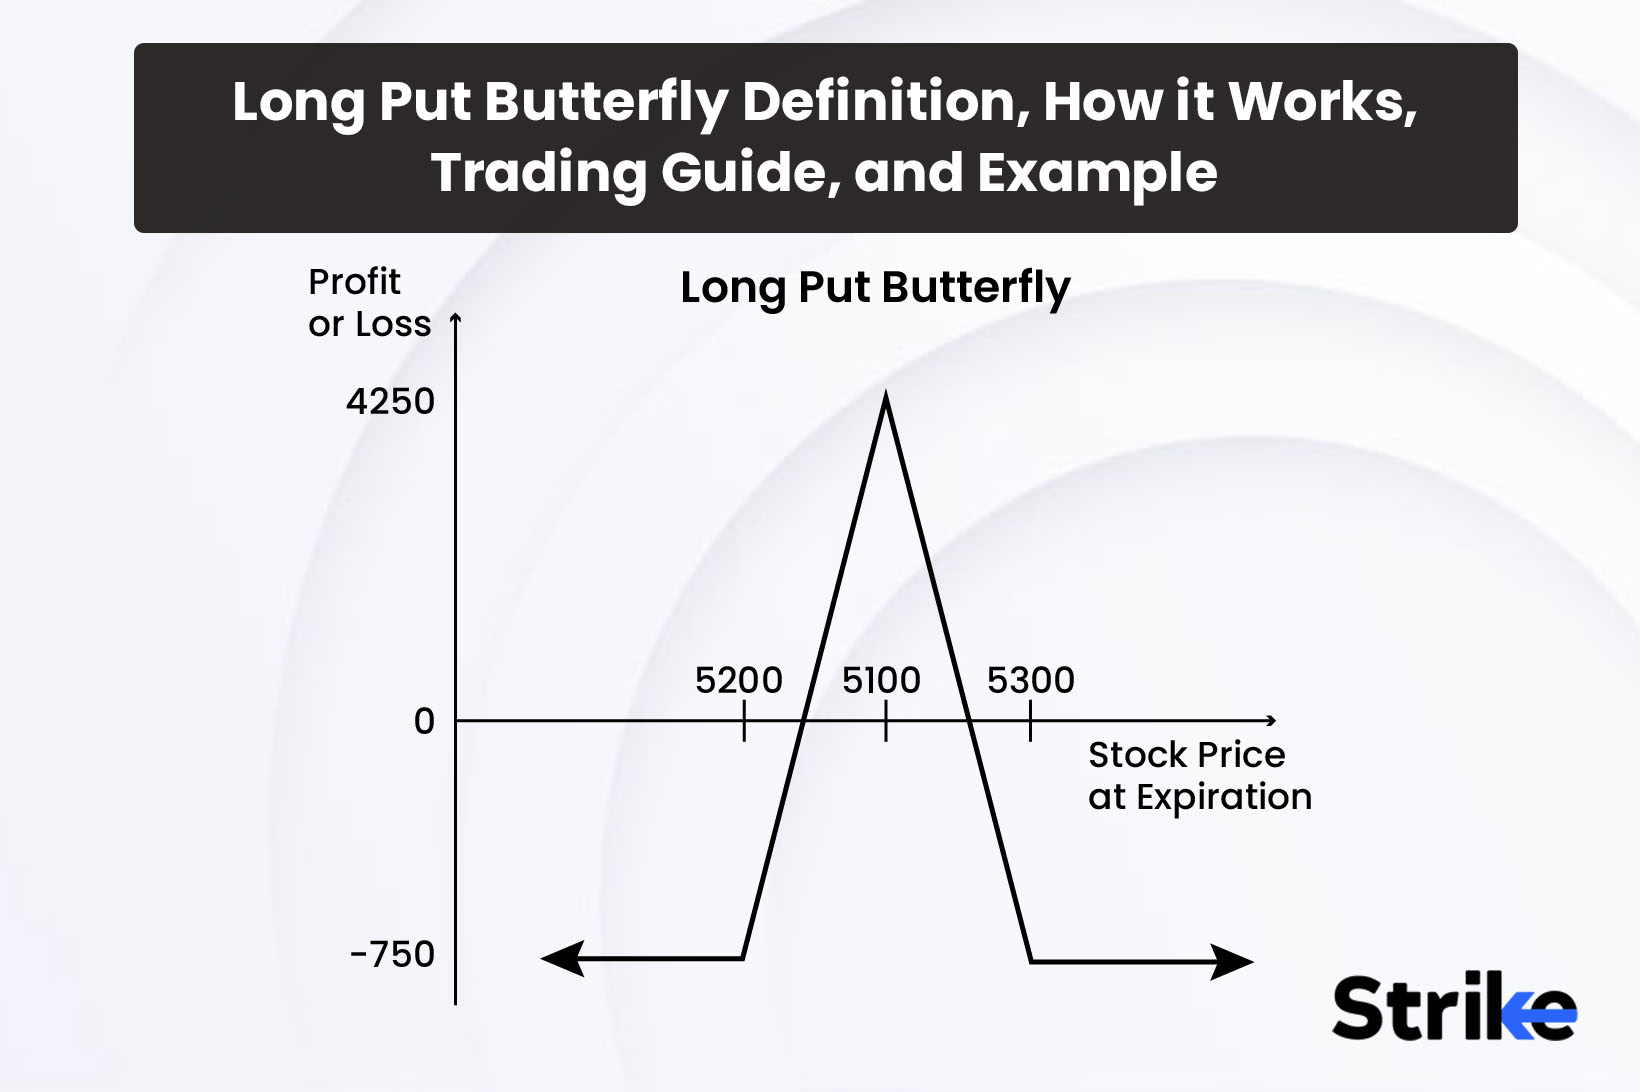 Long Put Butterfly: Definition, How it Works, Trading Guide, and Example